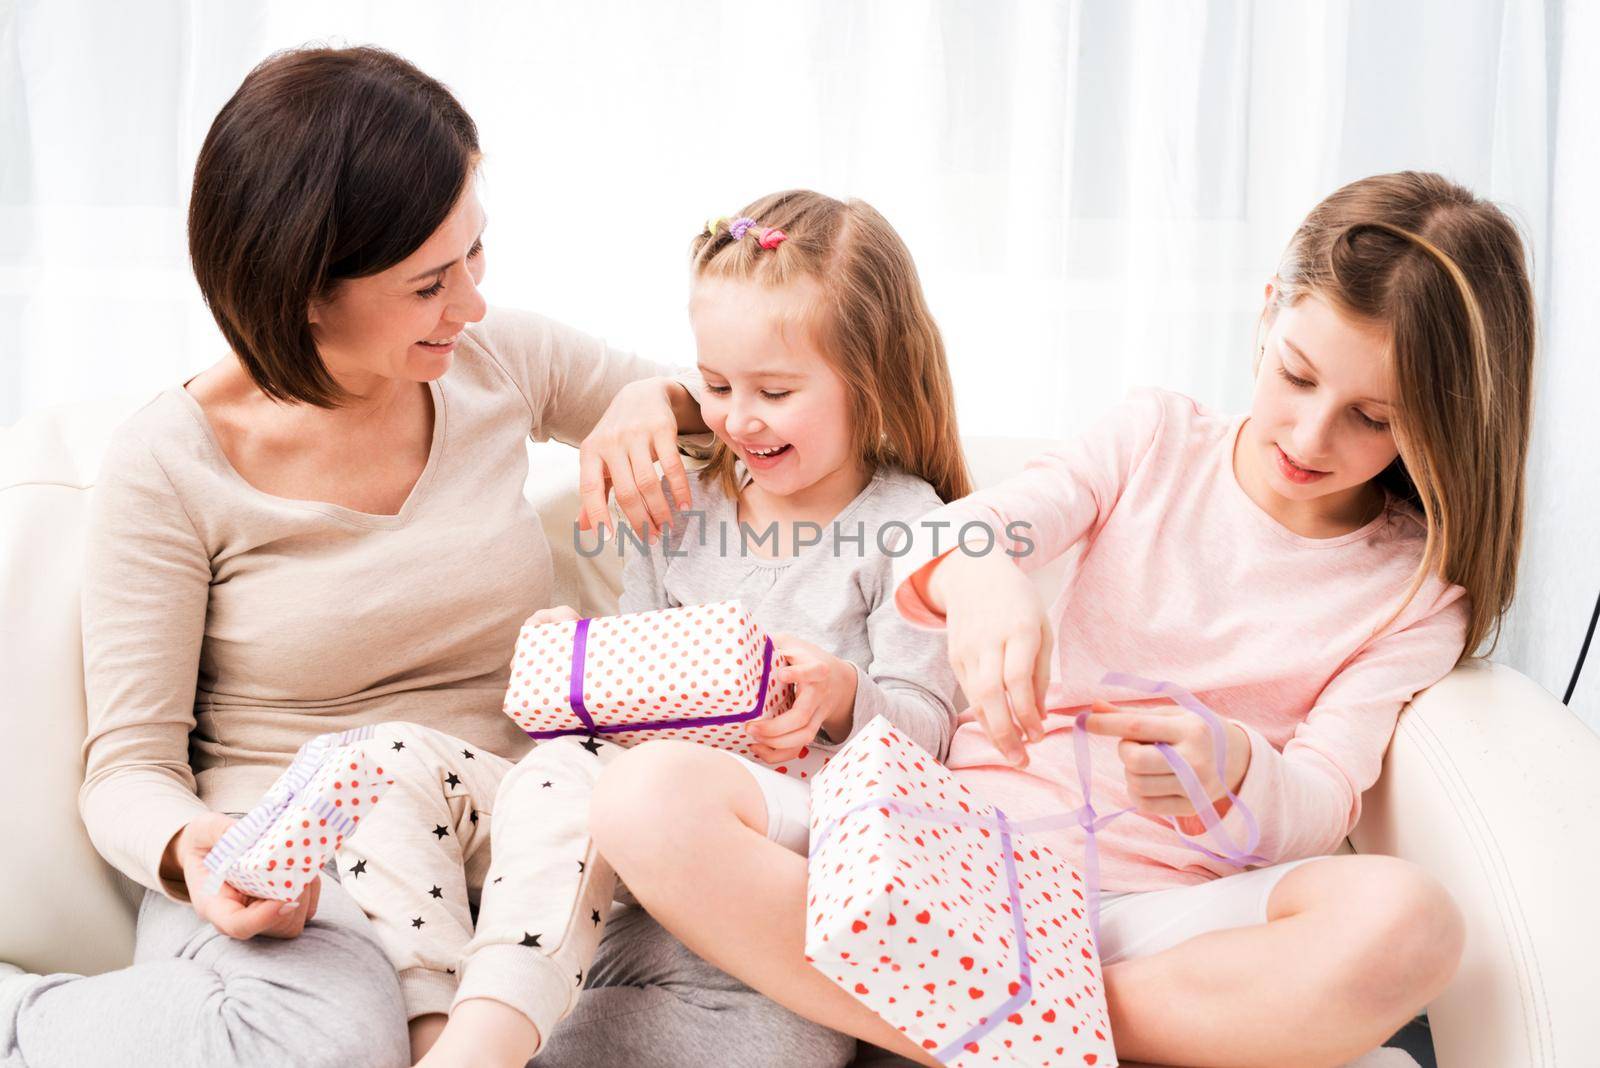 Cheerful mom and her beautiful daughters exchanging gifts Happy birthday, Happy Woman's day, Happy Mother's day, Christmas gifts. Mom and daughters unwrapping gifts